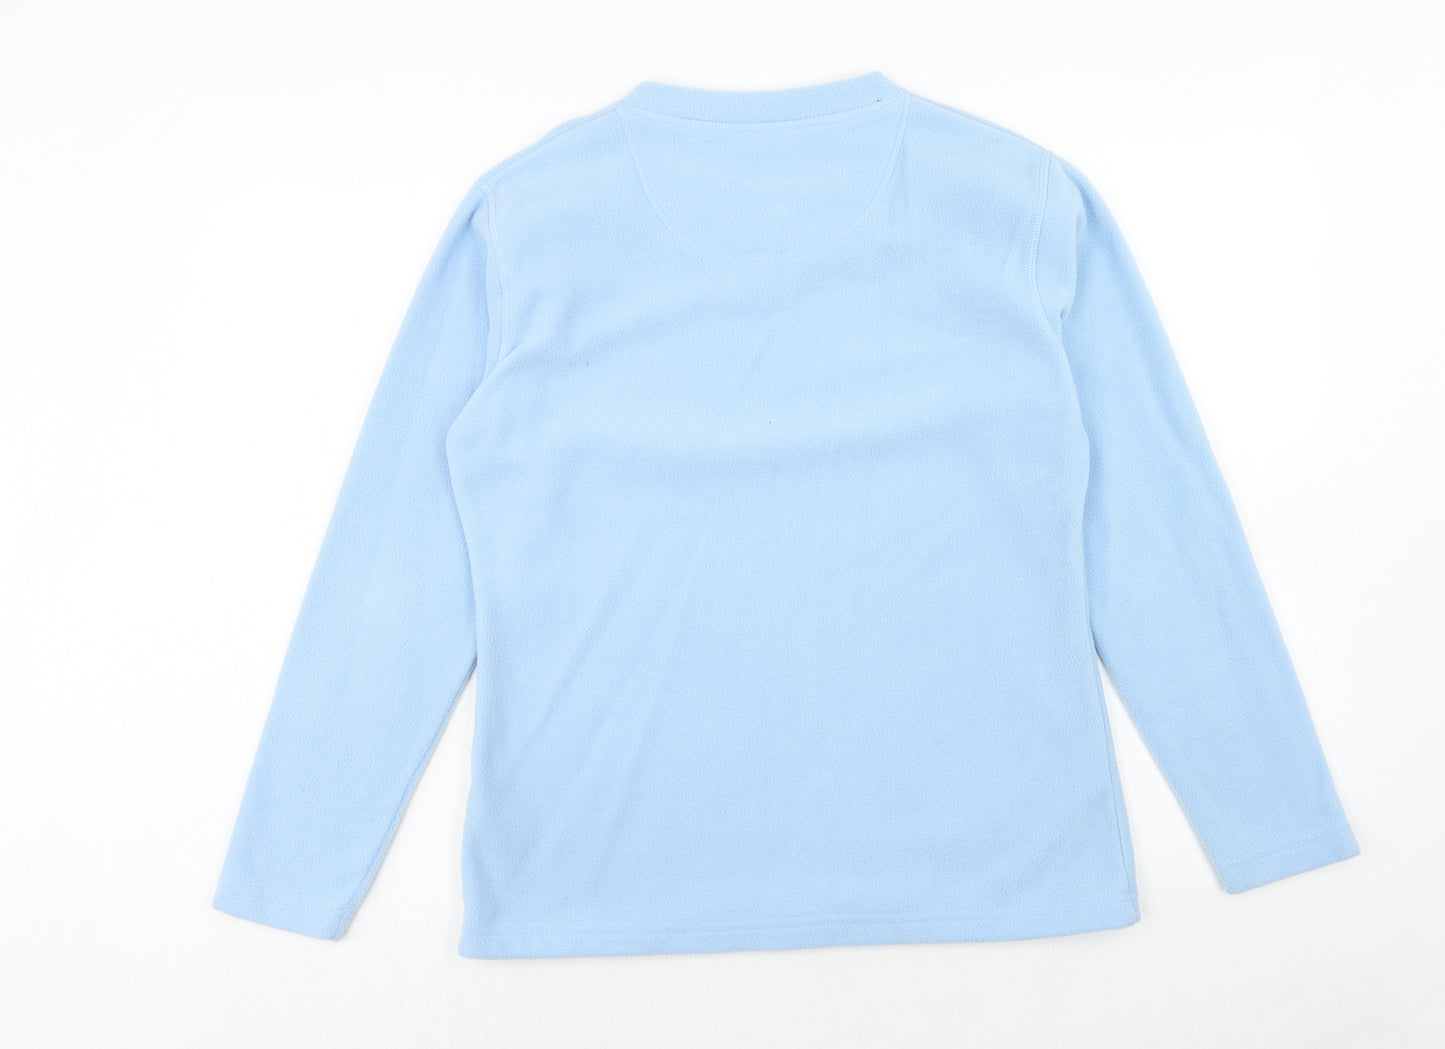 Millets Value Mens Blue Polyester Pullover Sweatshirt Size S